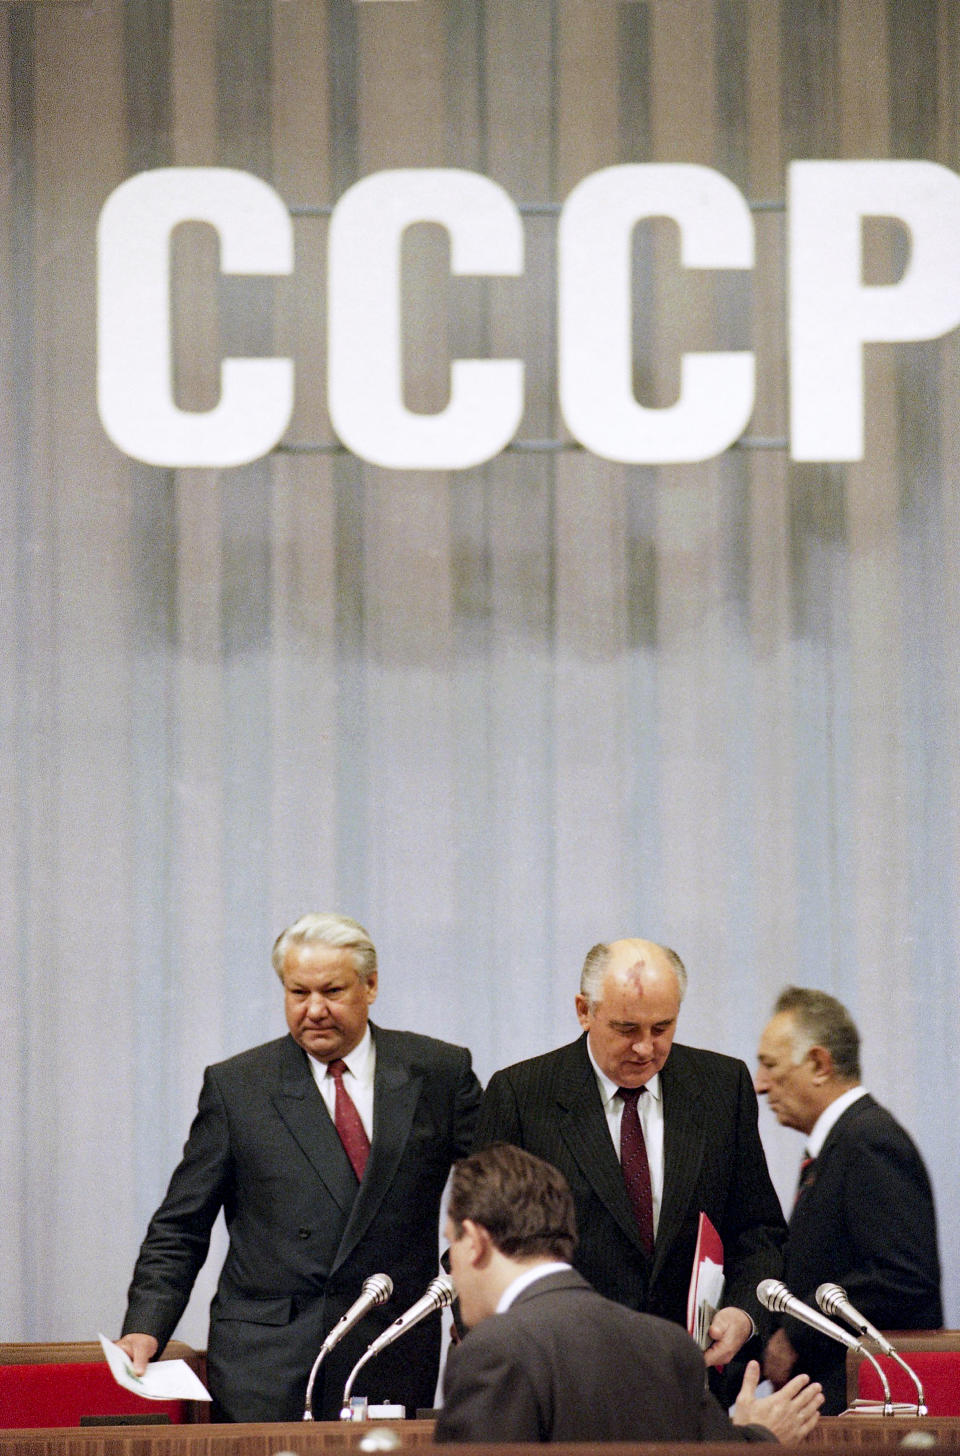 FILE – Russian Federation President Boris Yeltsin, left, and Soviet President Mikhail Gorbachev enter at the start of the closing session of the Congress of People's Deputies in Moscow, Russia on Thursday, Sept. 5, 1991. Gorbachev said Yeltsin was a driving force behind the collapse of the Soviet Union. (AP Photo/Alexander Zemlianichenko, File)